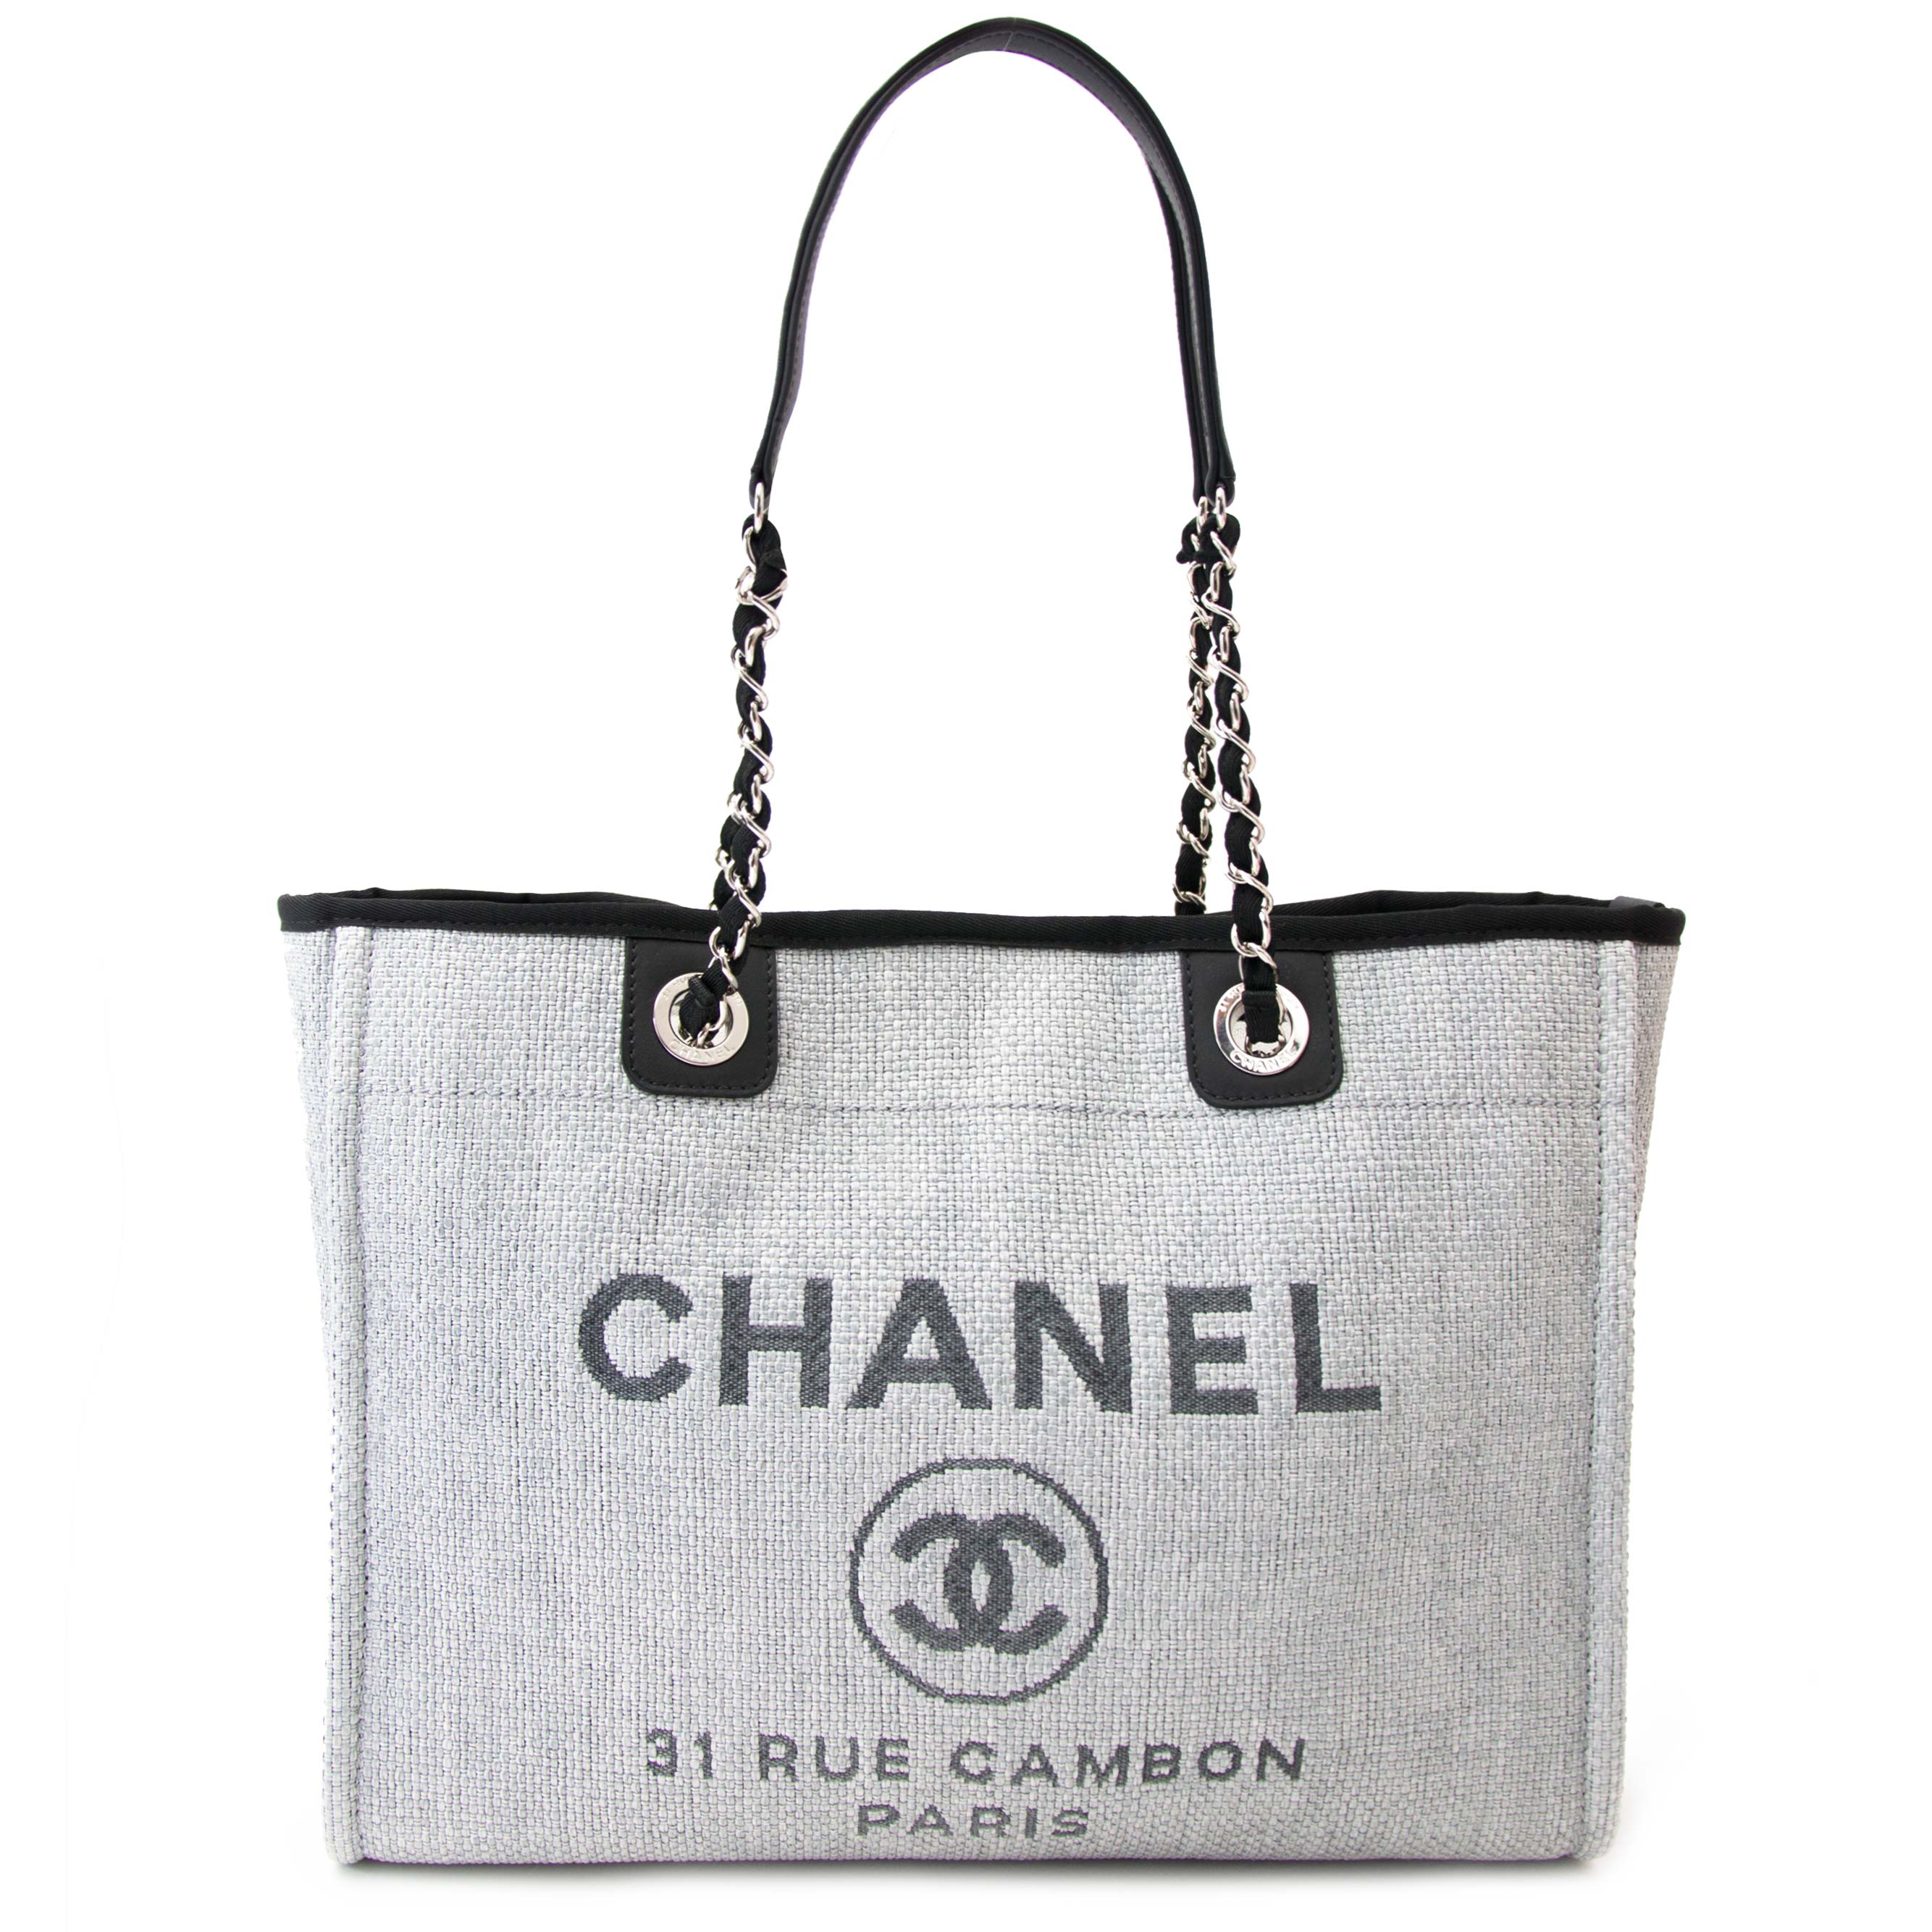 Womens Chanel Tote bags from A890  Lyst Australia